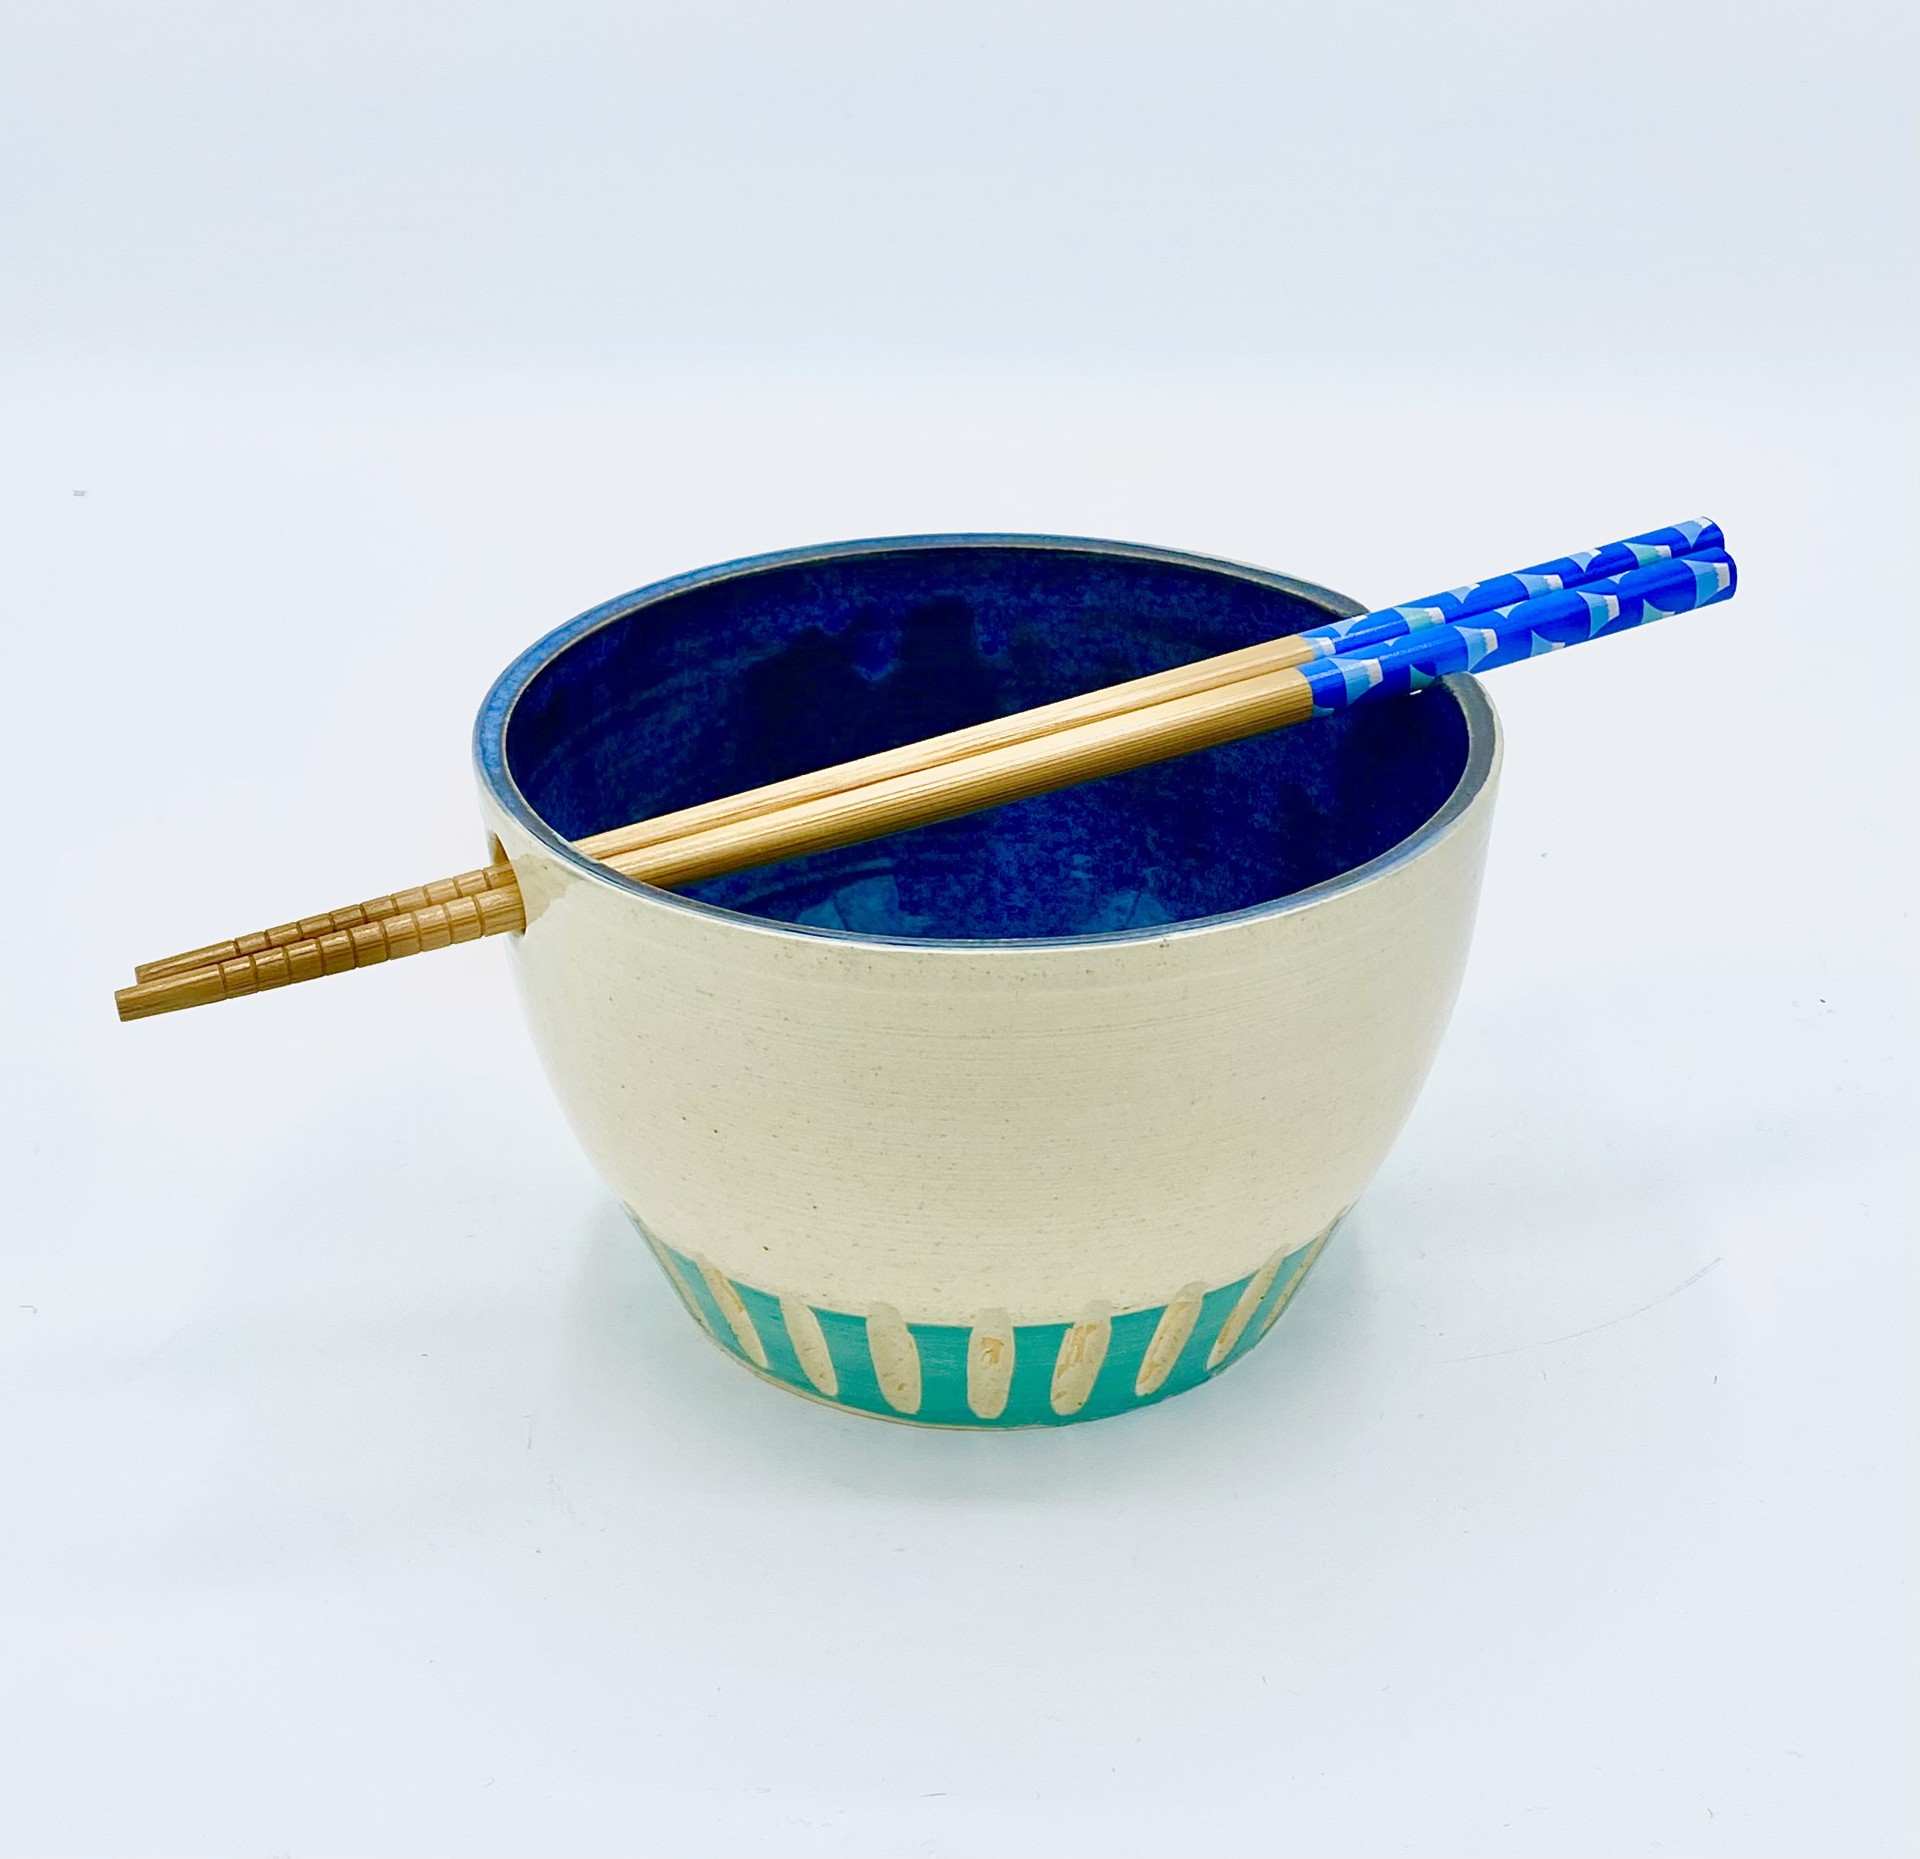 Medium Cream and Denim Noodle Bowl by Messy Pots Pottery